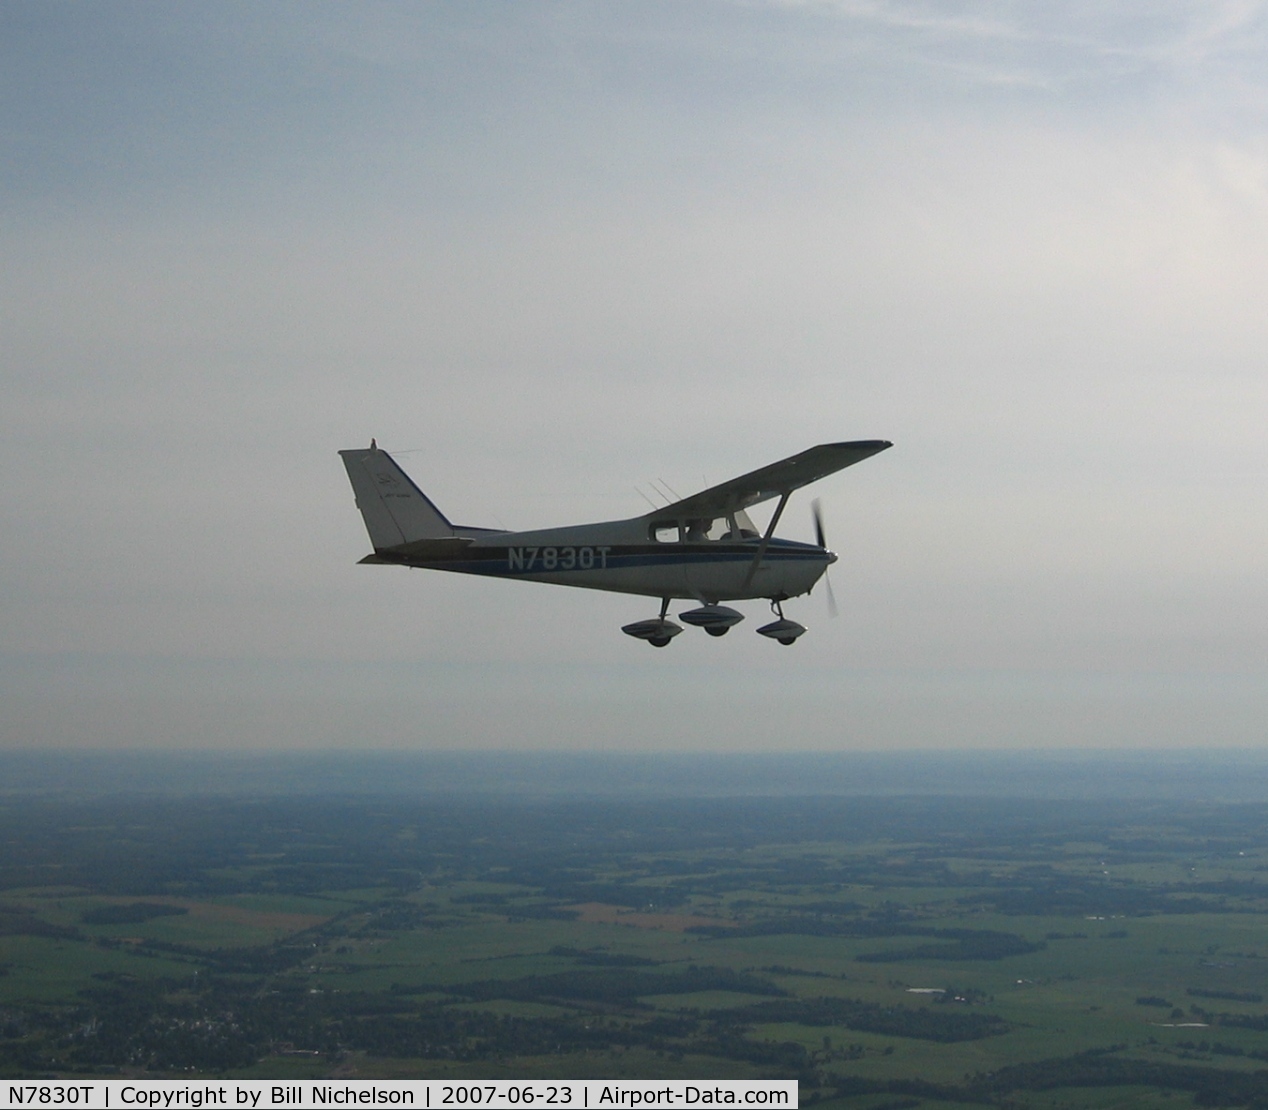 N7830T, 1960 Cessna 172A C/N 47430, Enroute to Zanesville, OH (OH36 - Riverside Airfield)